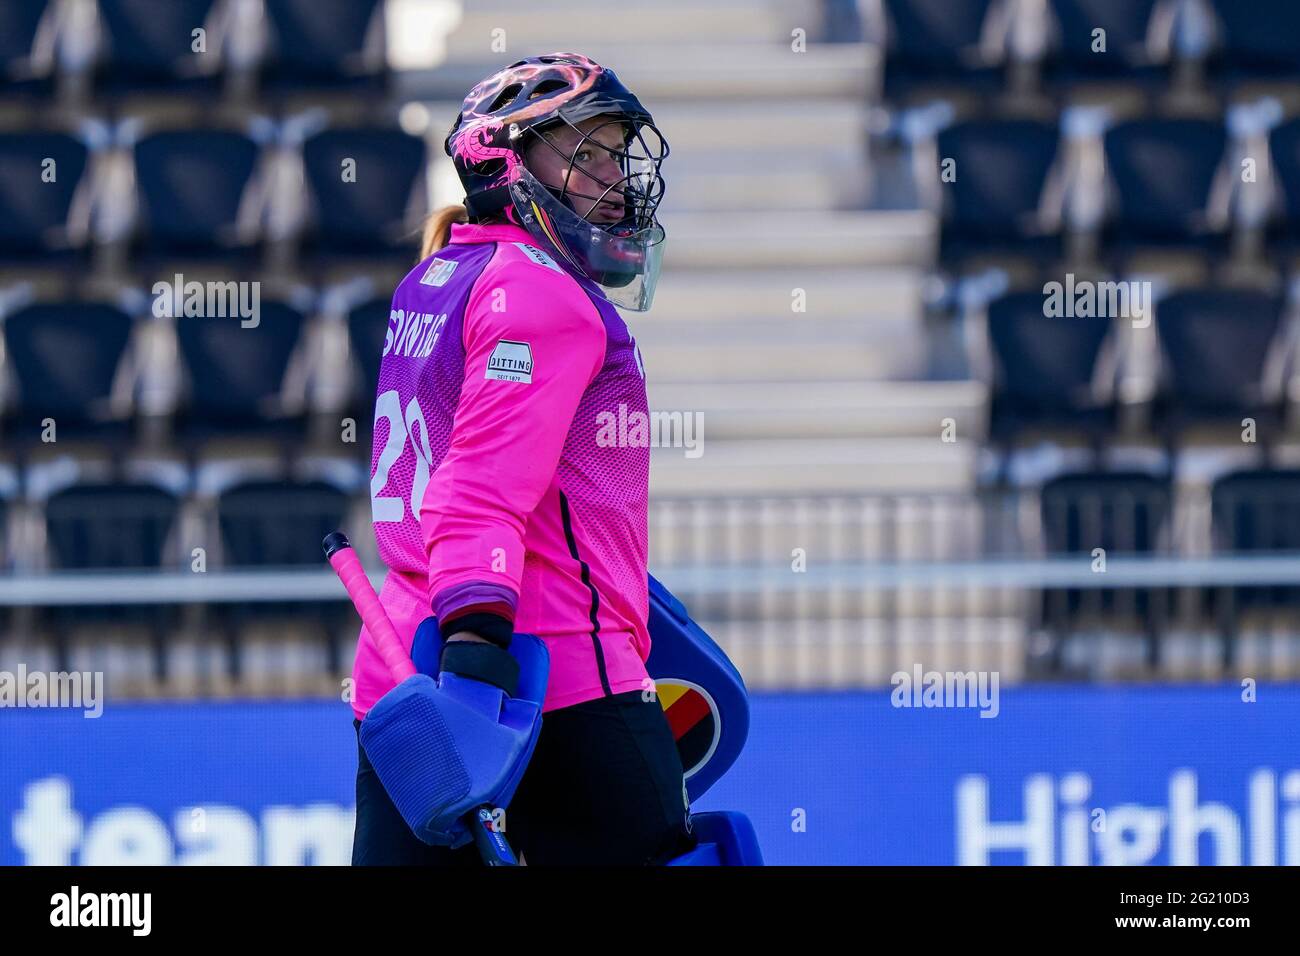 AMSTELVEEN, NETHERLANDS - JUNE 7: goalkeeper Julia Sonntag of Germany during the Euro Hockey Championships match between England and Germany at Wagener Stadion on June 7, 2021 in Amstelveen, Netherlands (Photo by Jeroen Meuwsen/Orange Pictures) Stock Photo